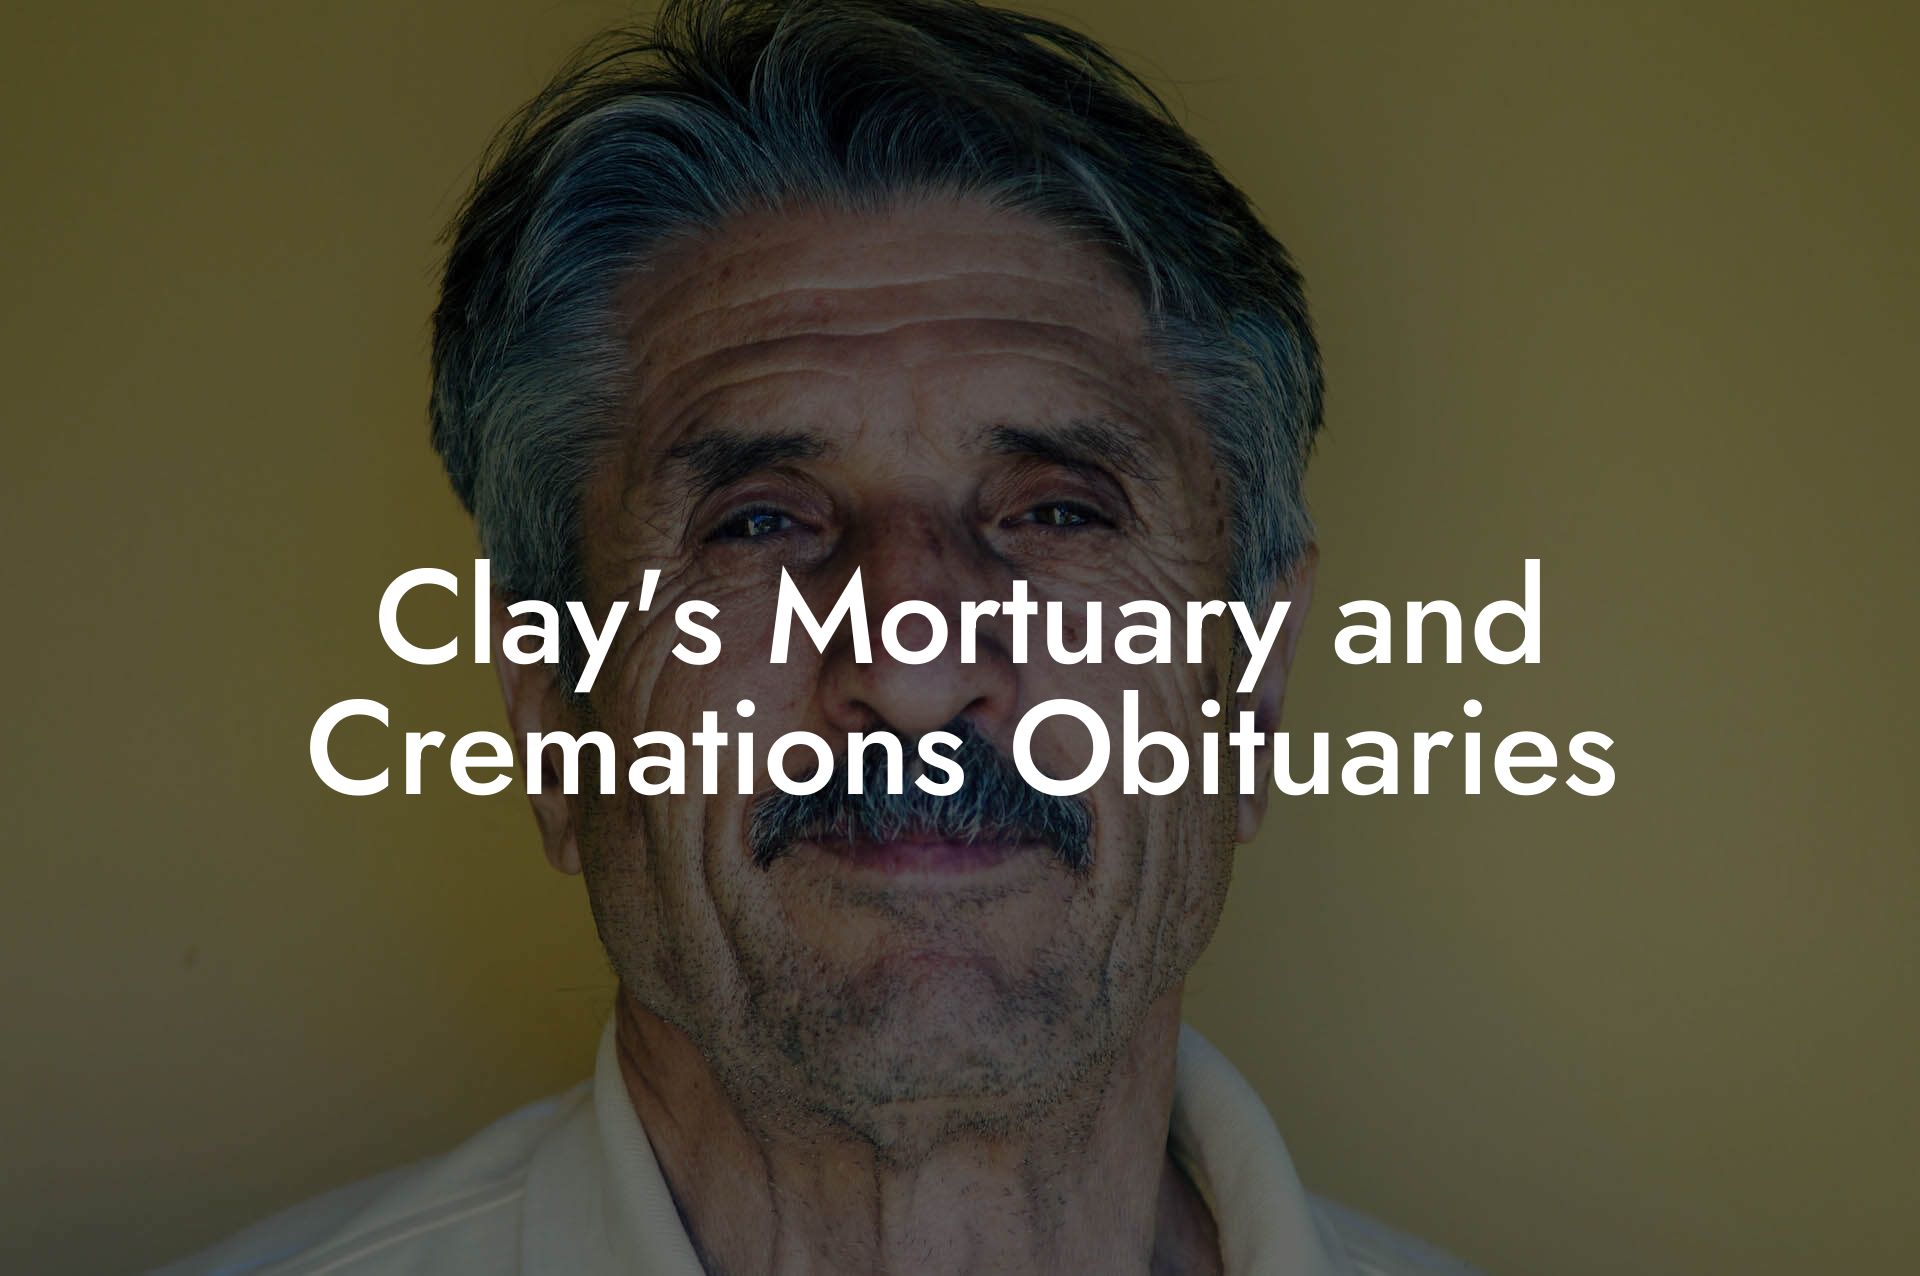 Clay's Mortuary and Cremations Obituaries